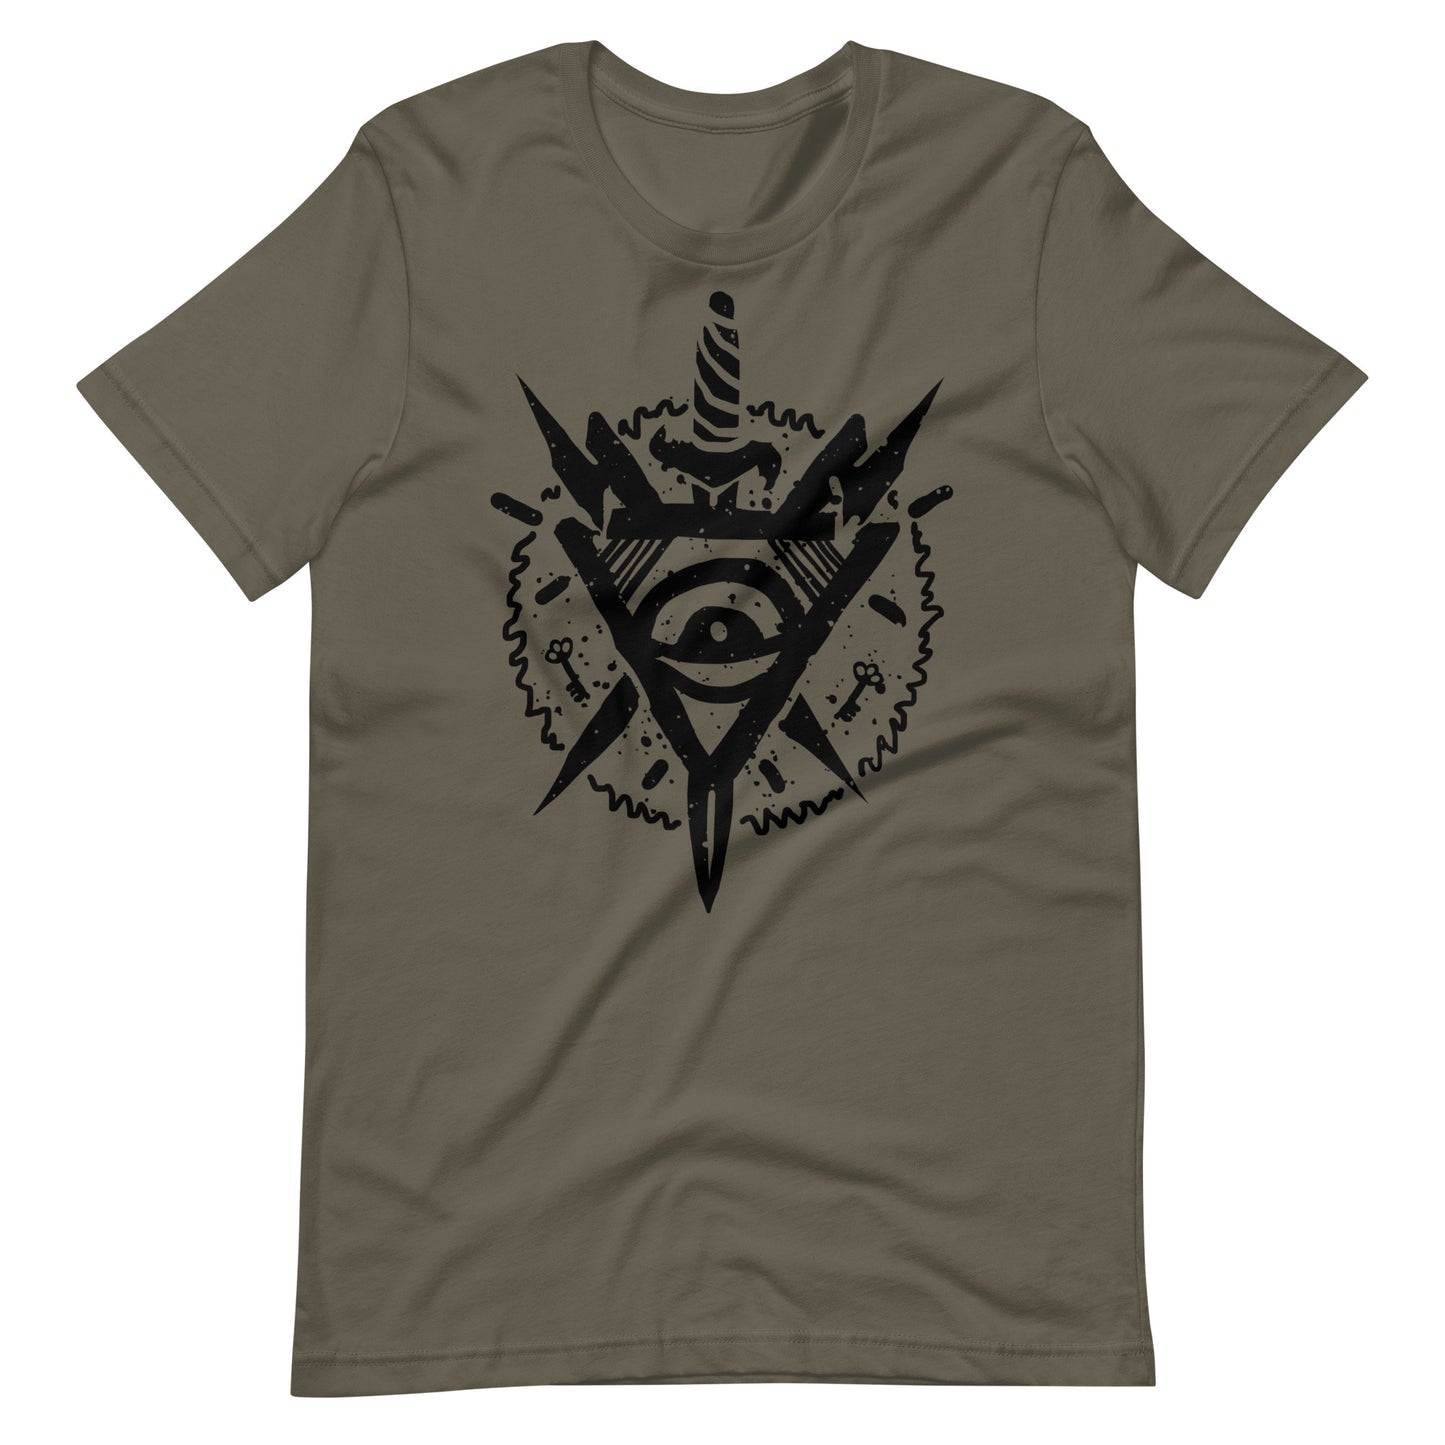 Triangle Eye Black - Men's t-shirt - Army Front